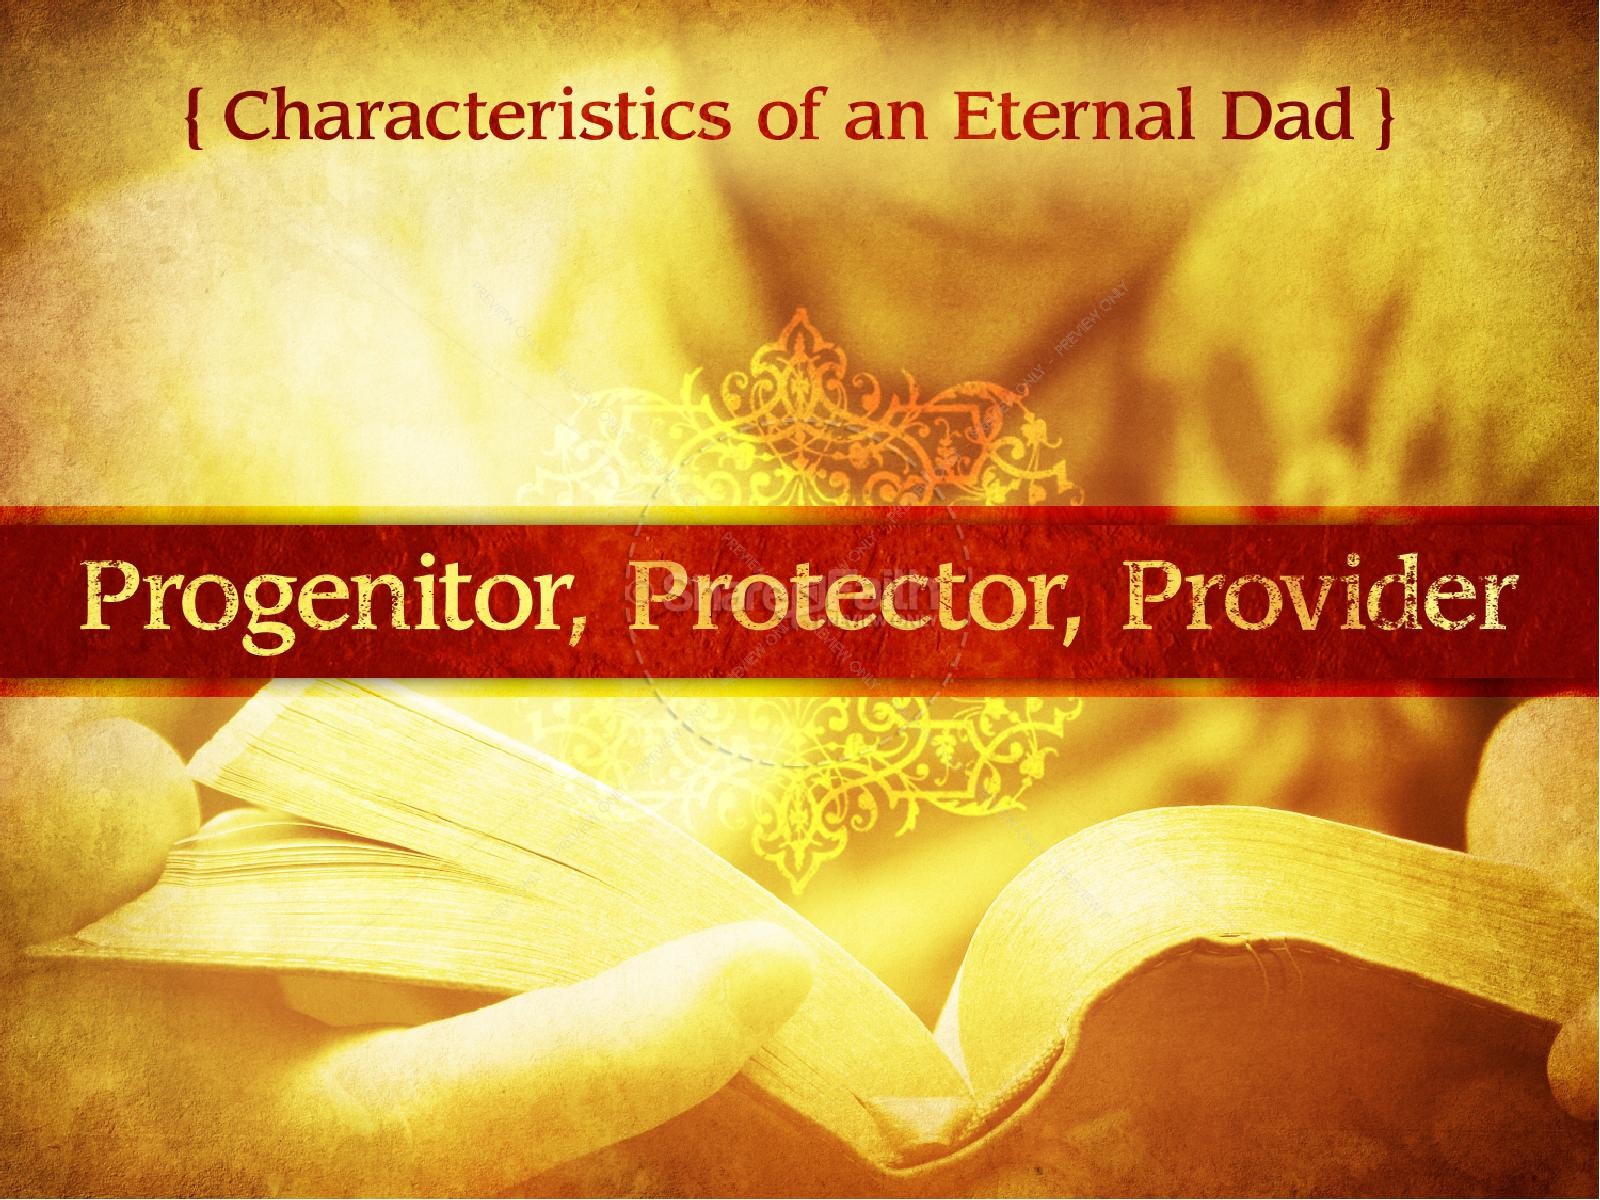 Our Father In Heaven PowerPoint Template